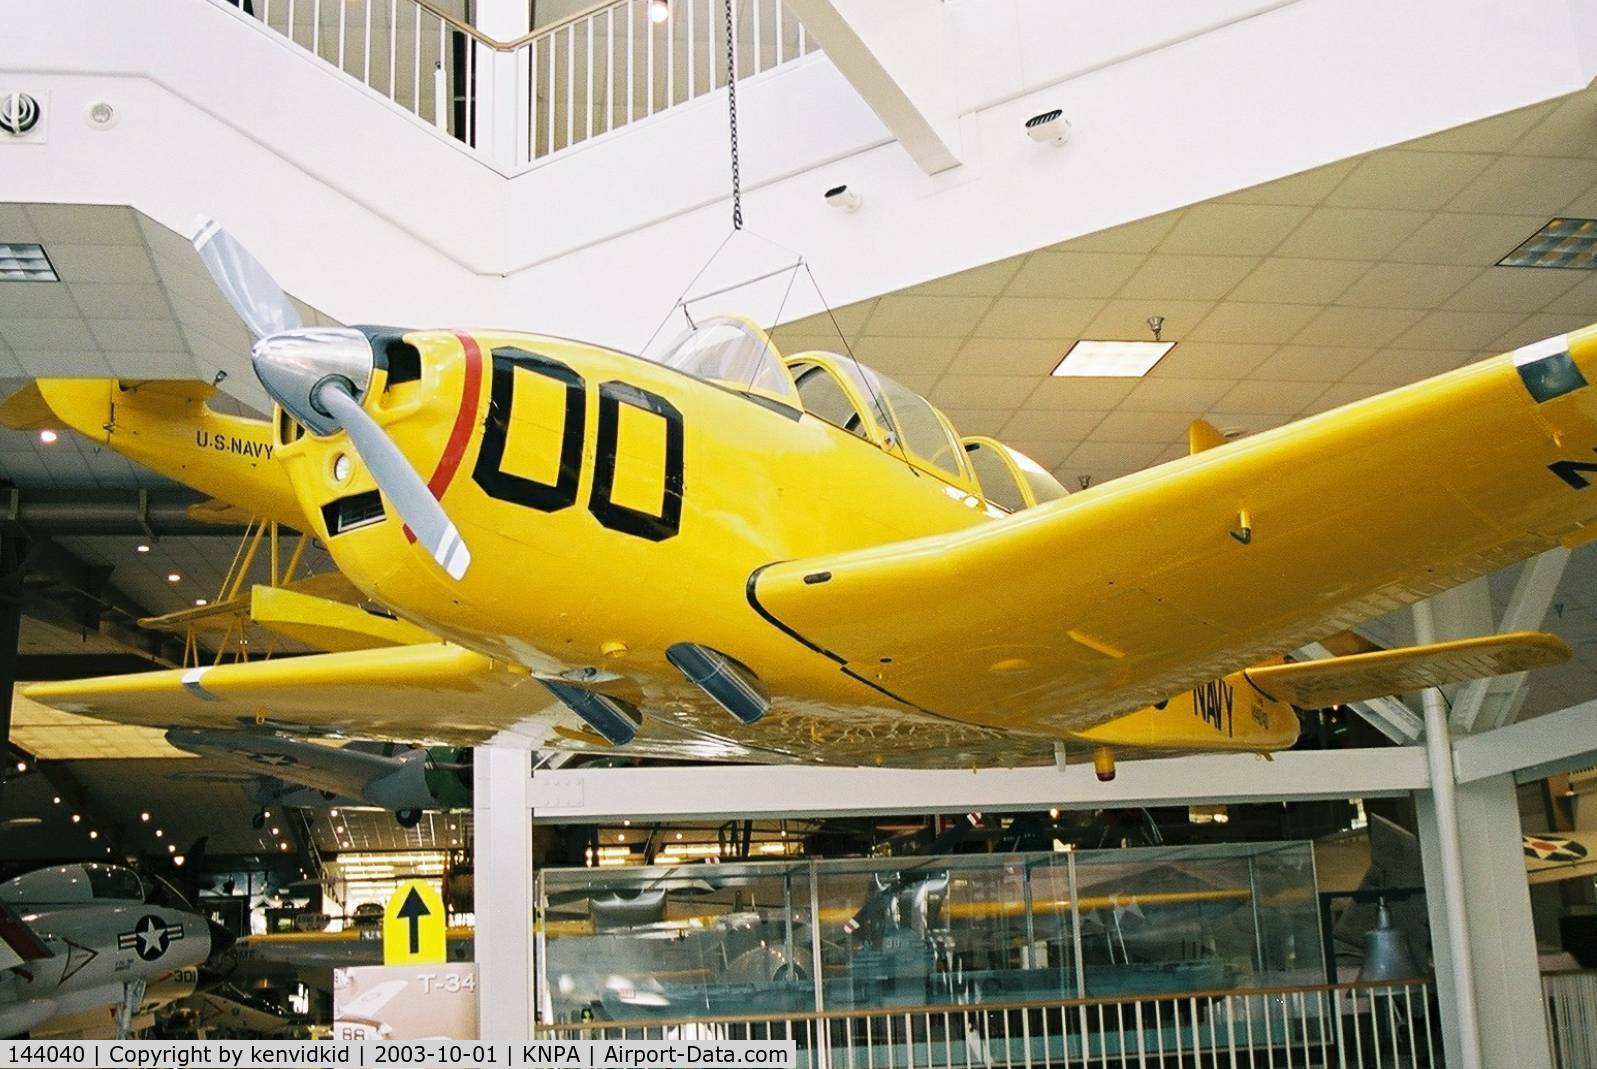 144040, Beech T-34B Mentor C/N BG-347, On display at the Museum of Naval Aviation, Pensacola.